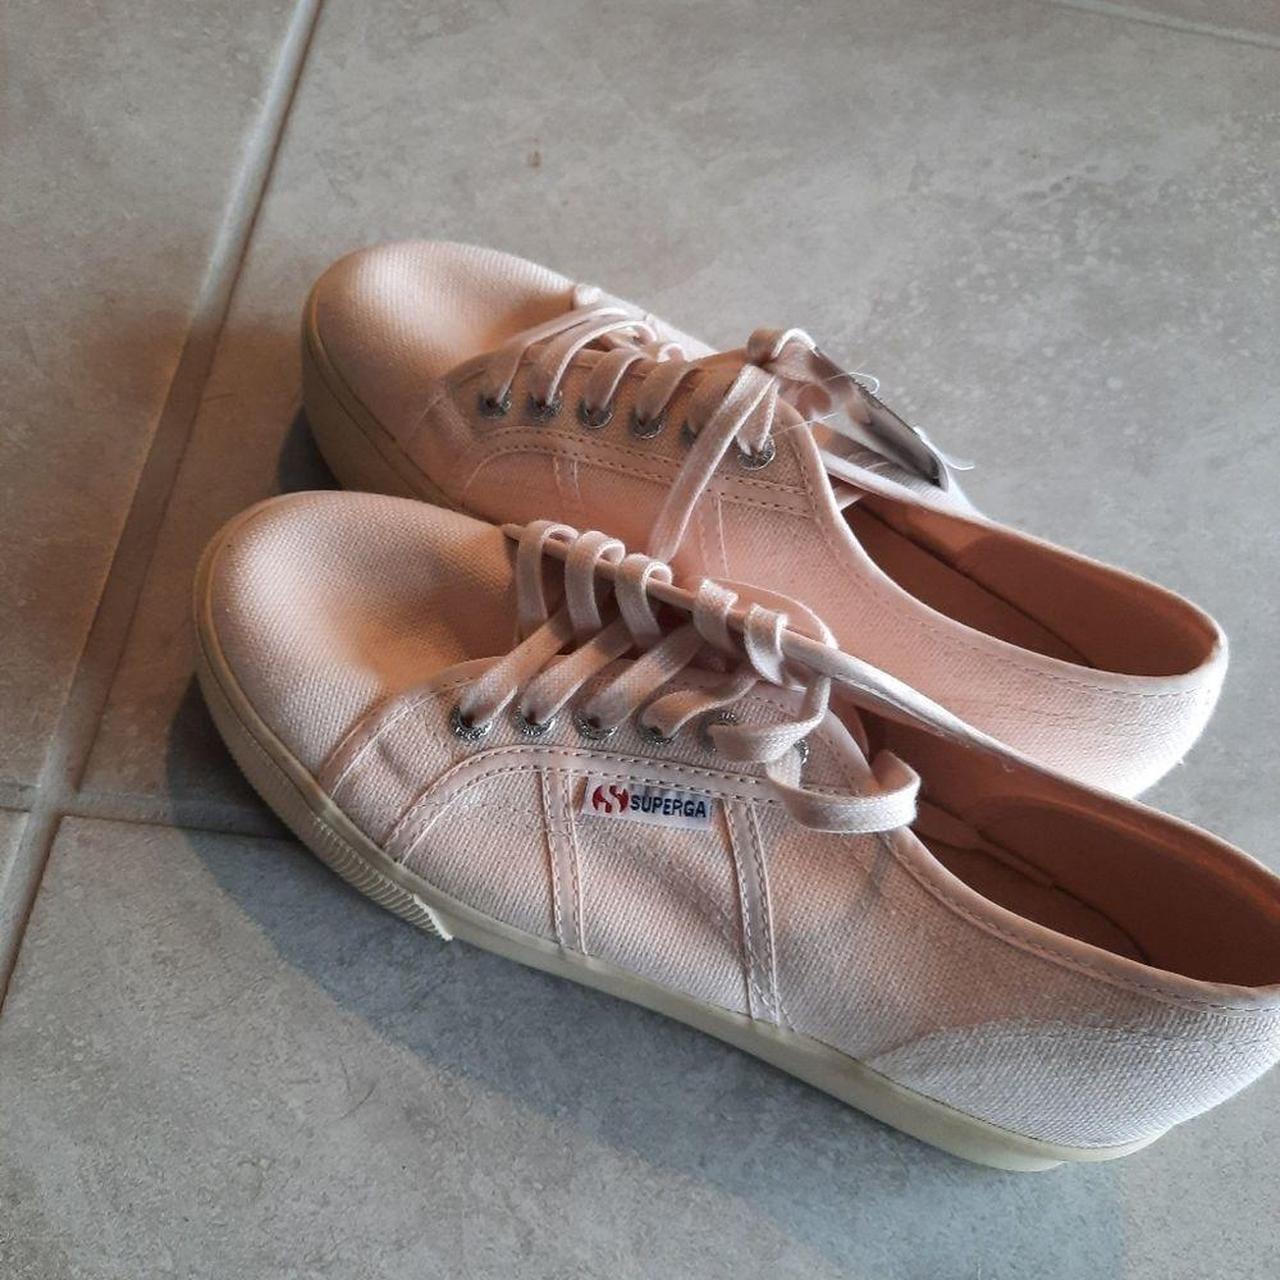 Product Image 3 - superga platform sneakers new with